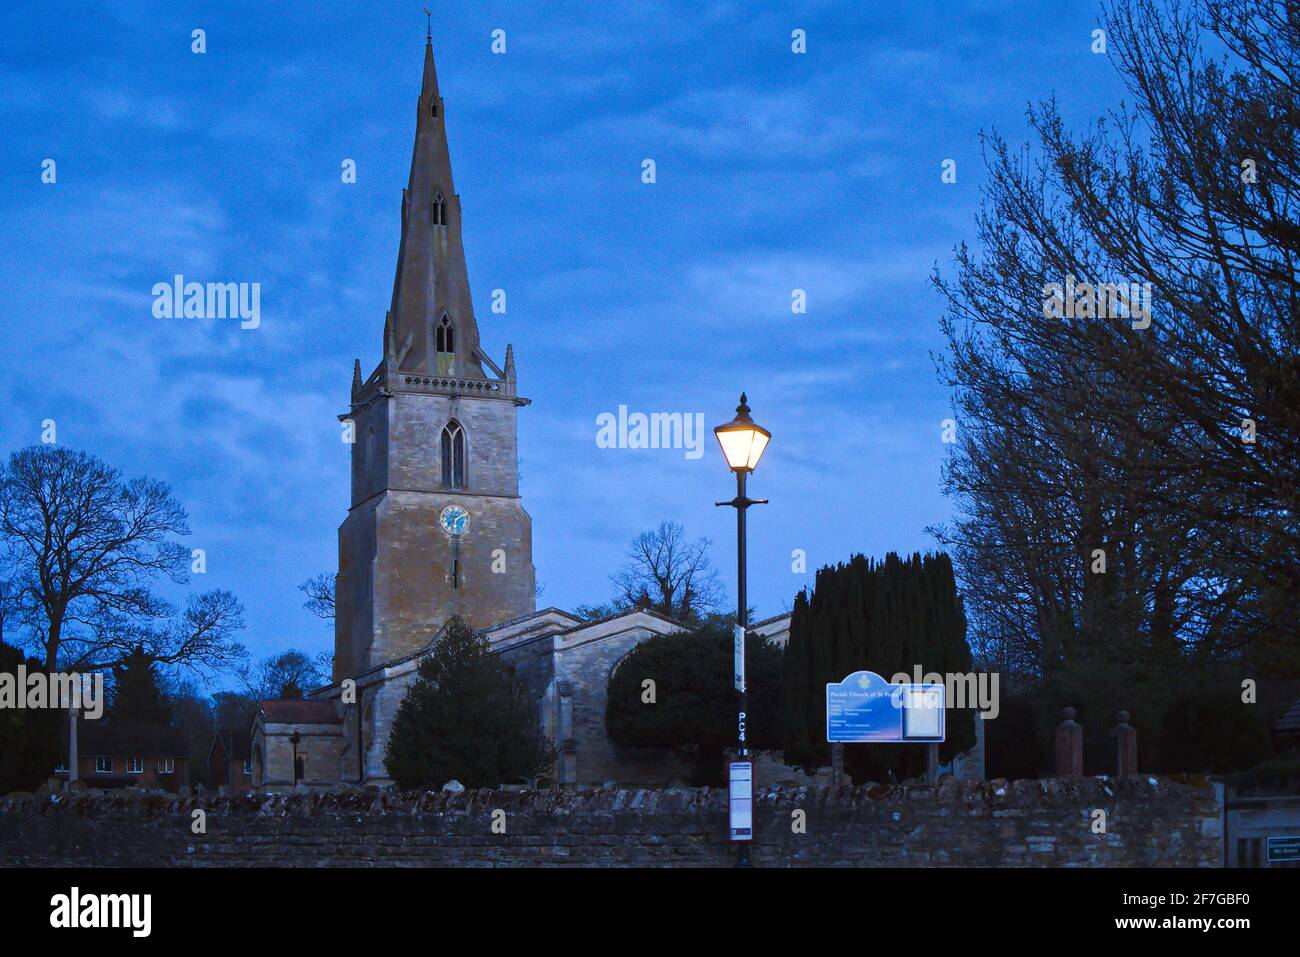 Sharnbrook village, Bedfordshire, England, UK - St Peter's Church in the early hours of the morning while still dark and streetlamp is lit Stock Photo